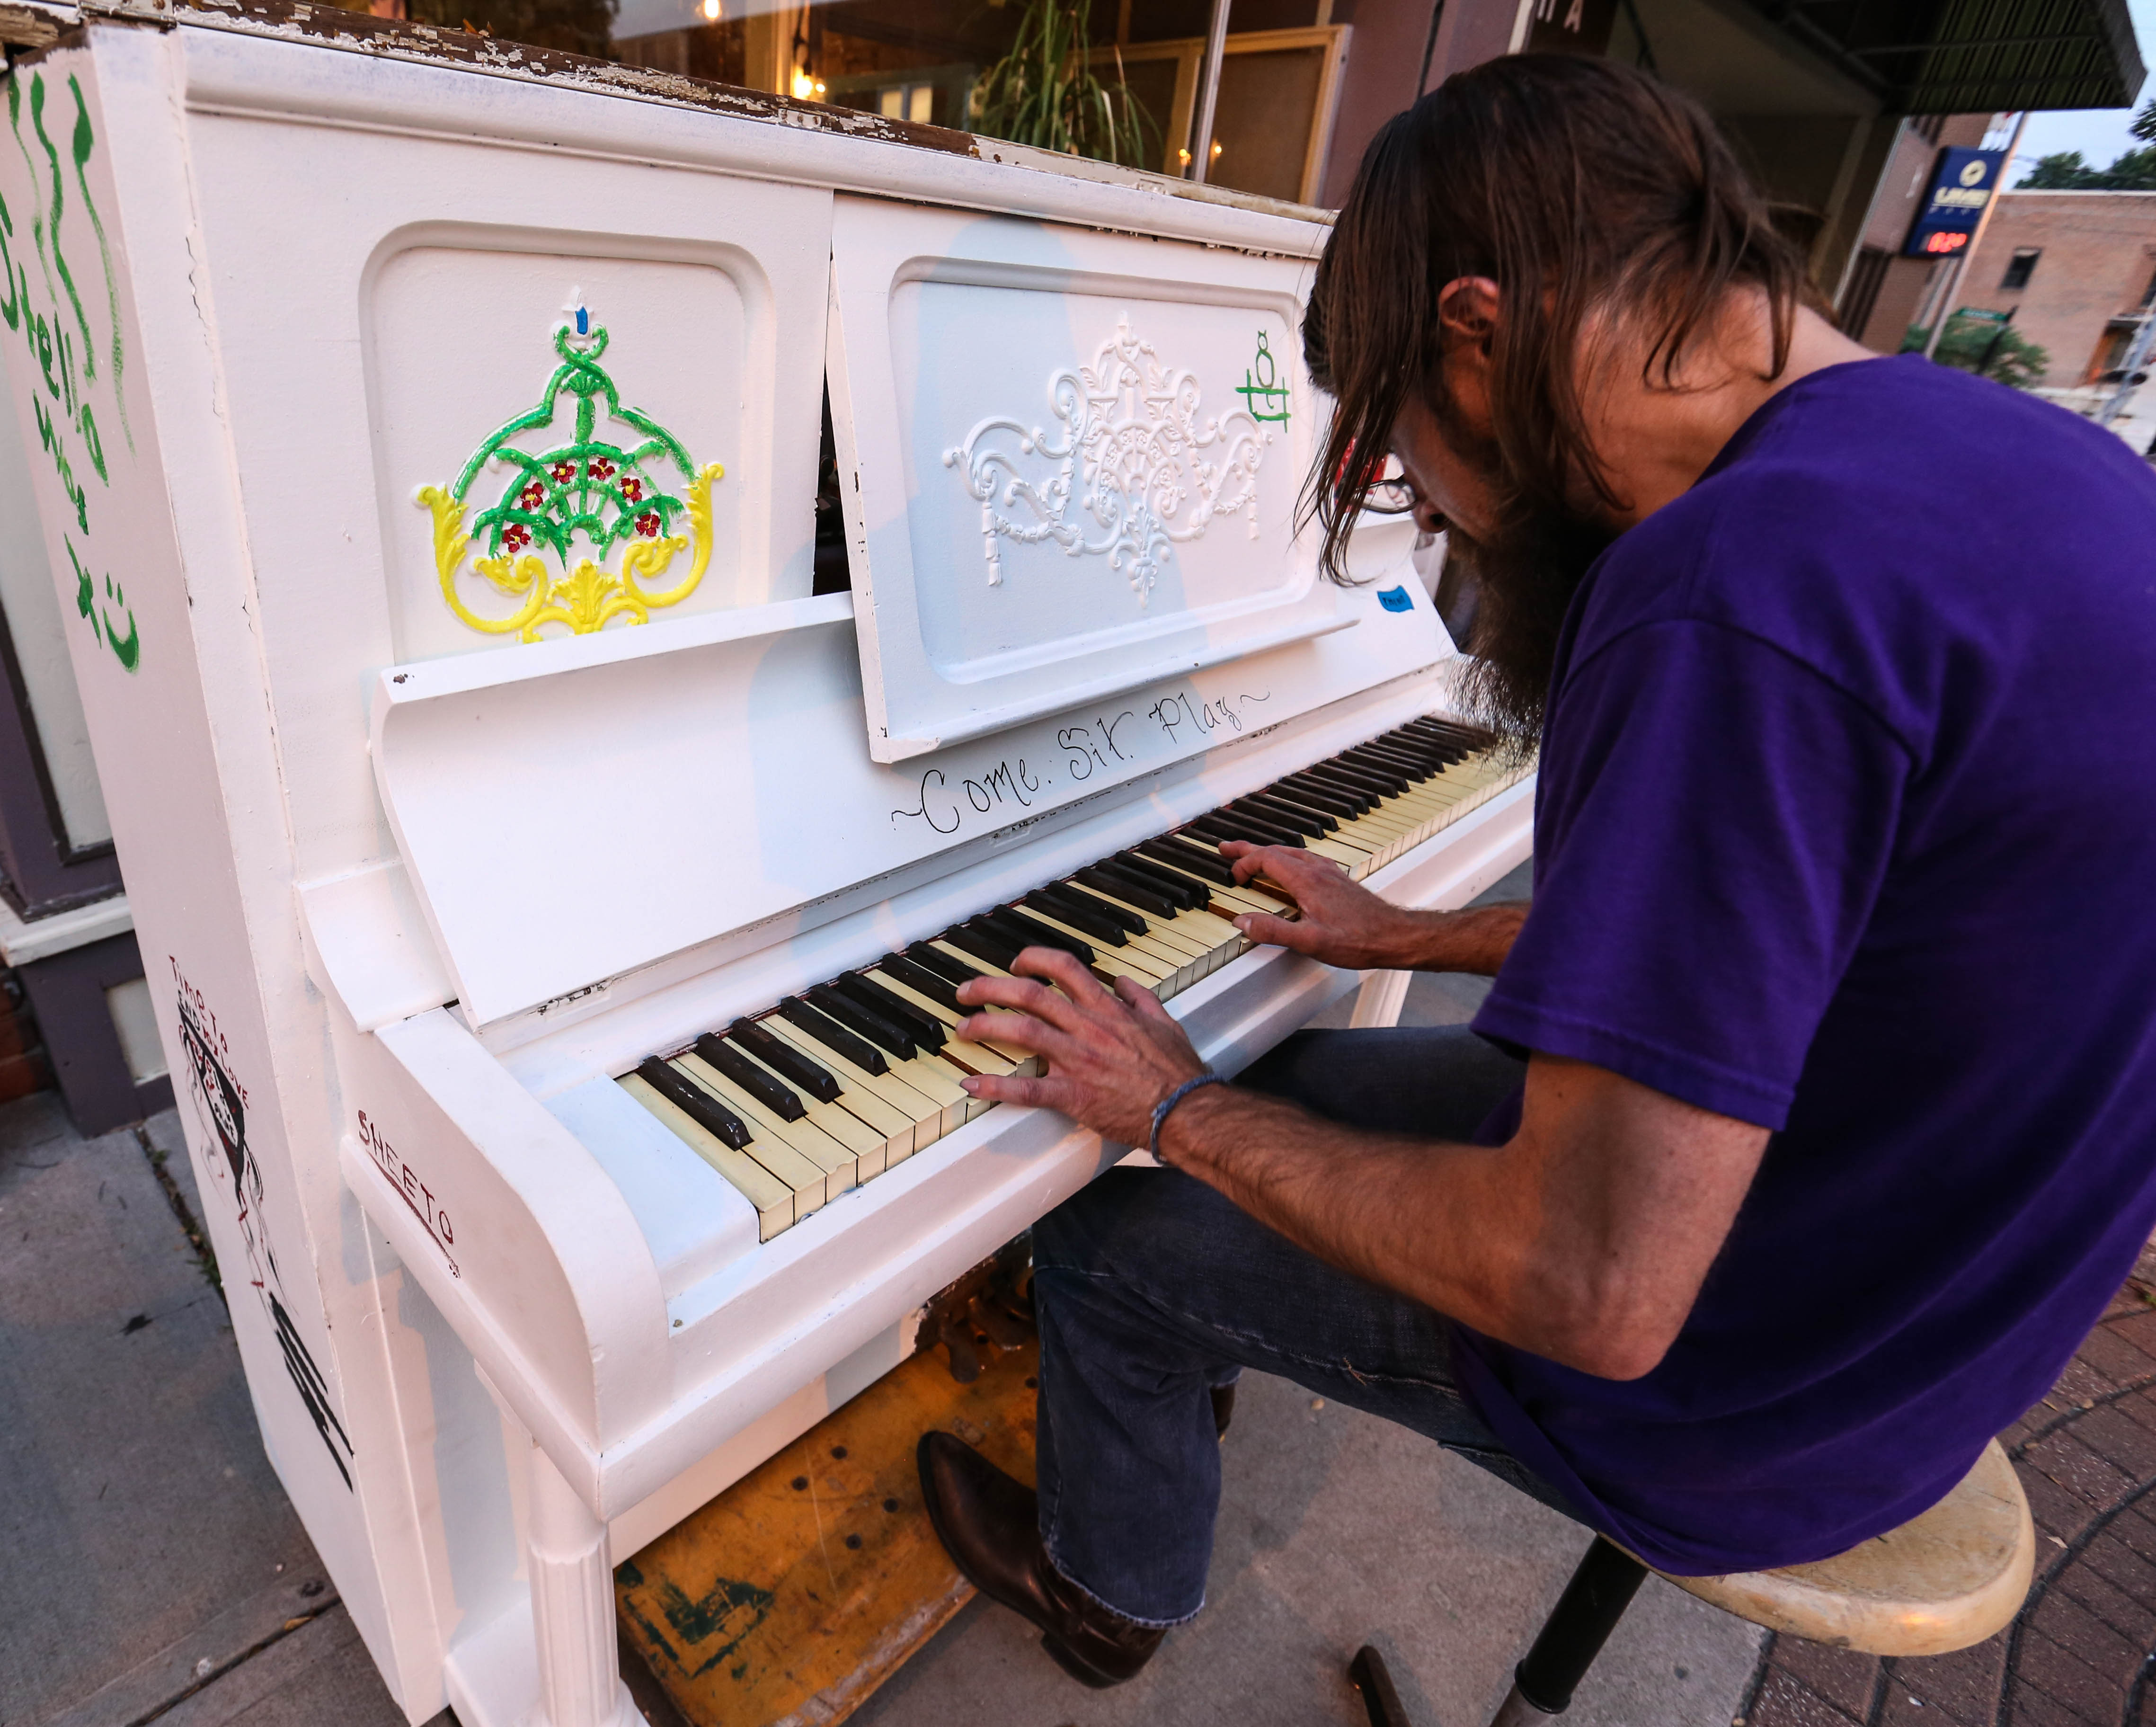 Painted Piano Project brings Warrensburg community together